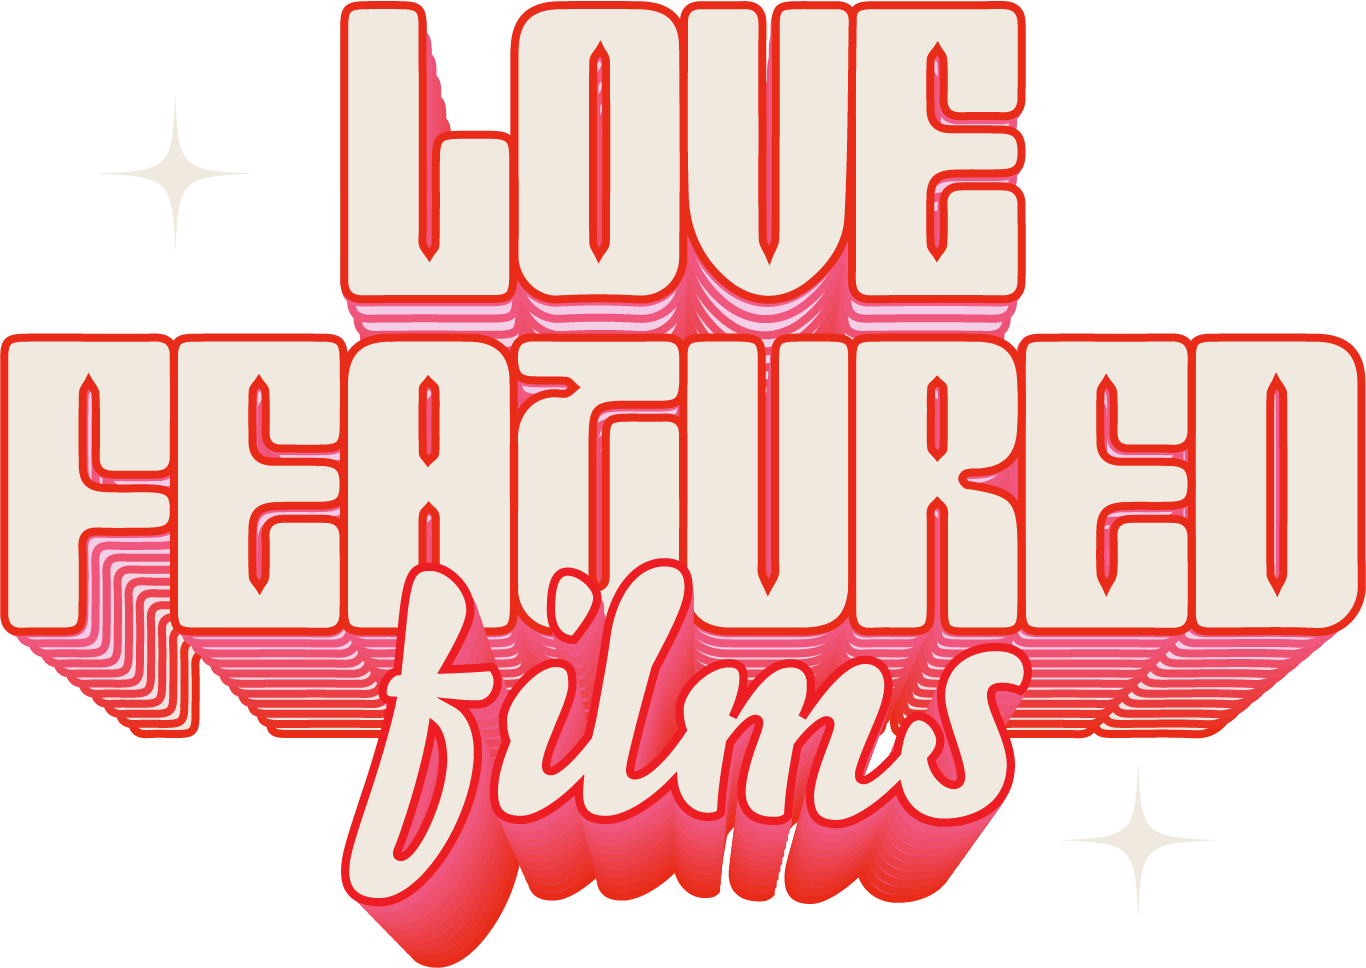 Love Featured Films